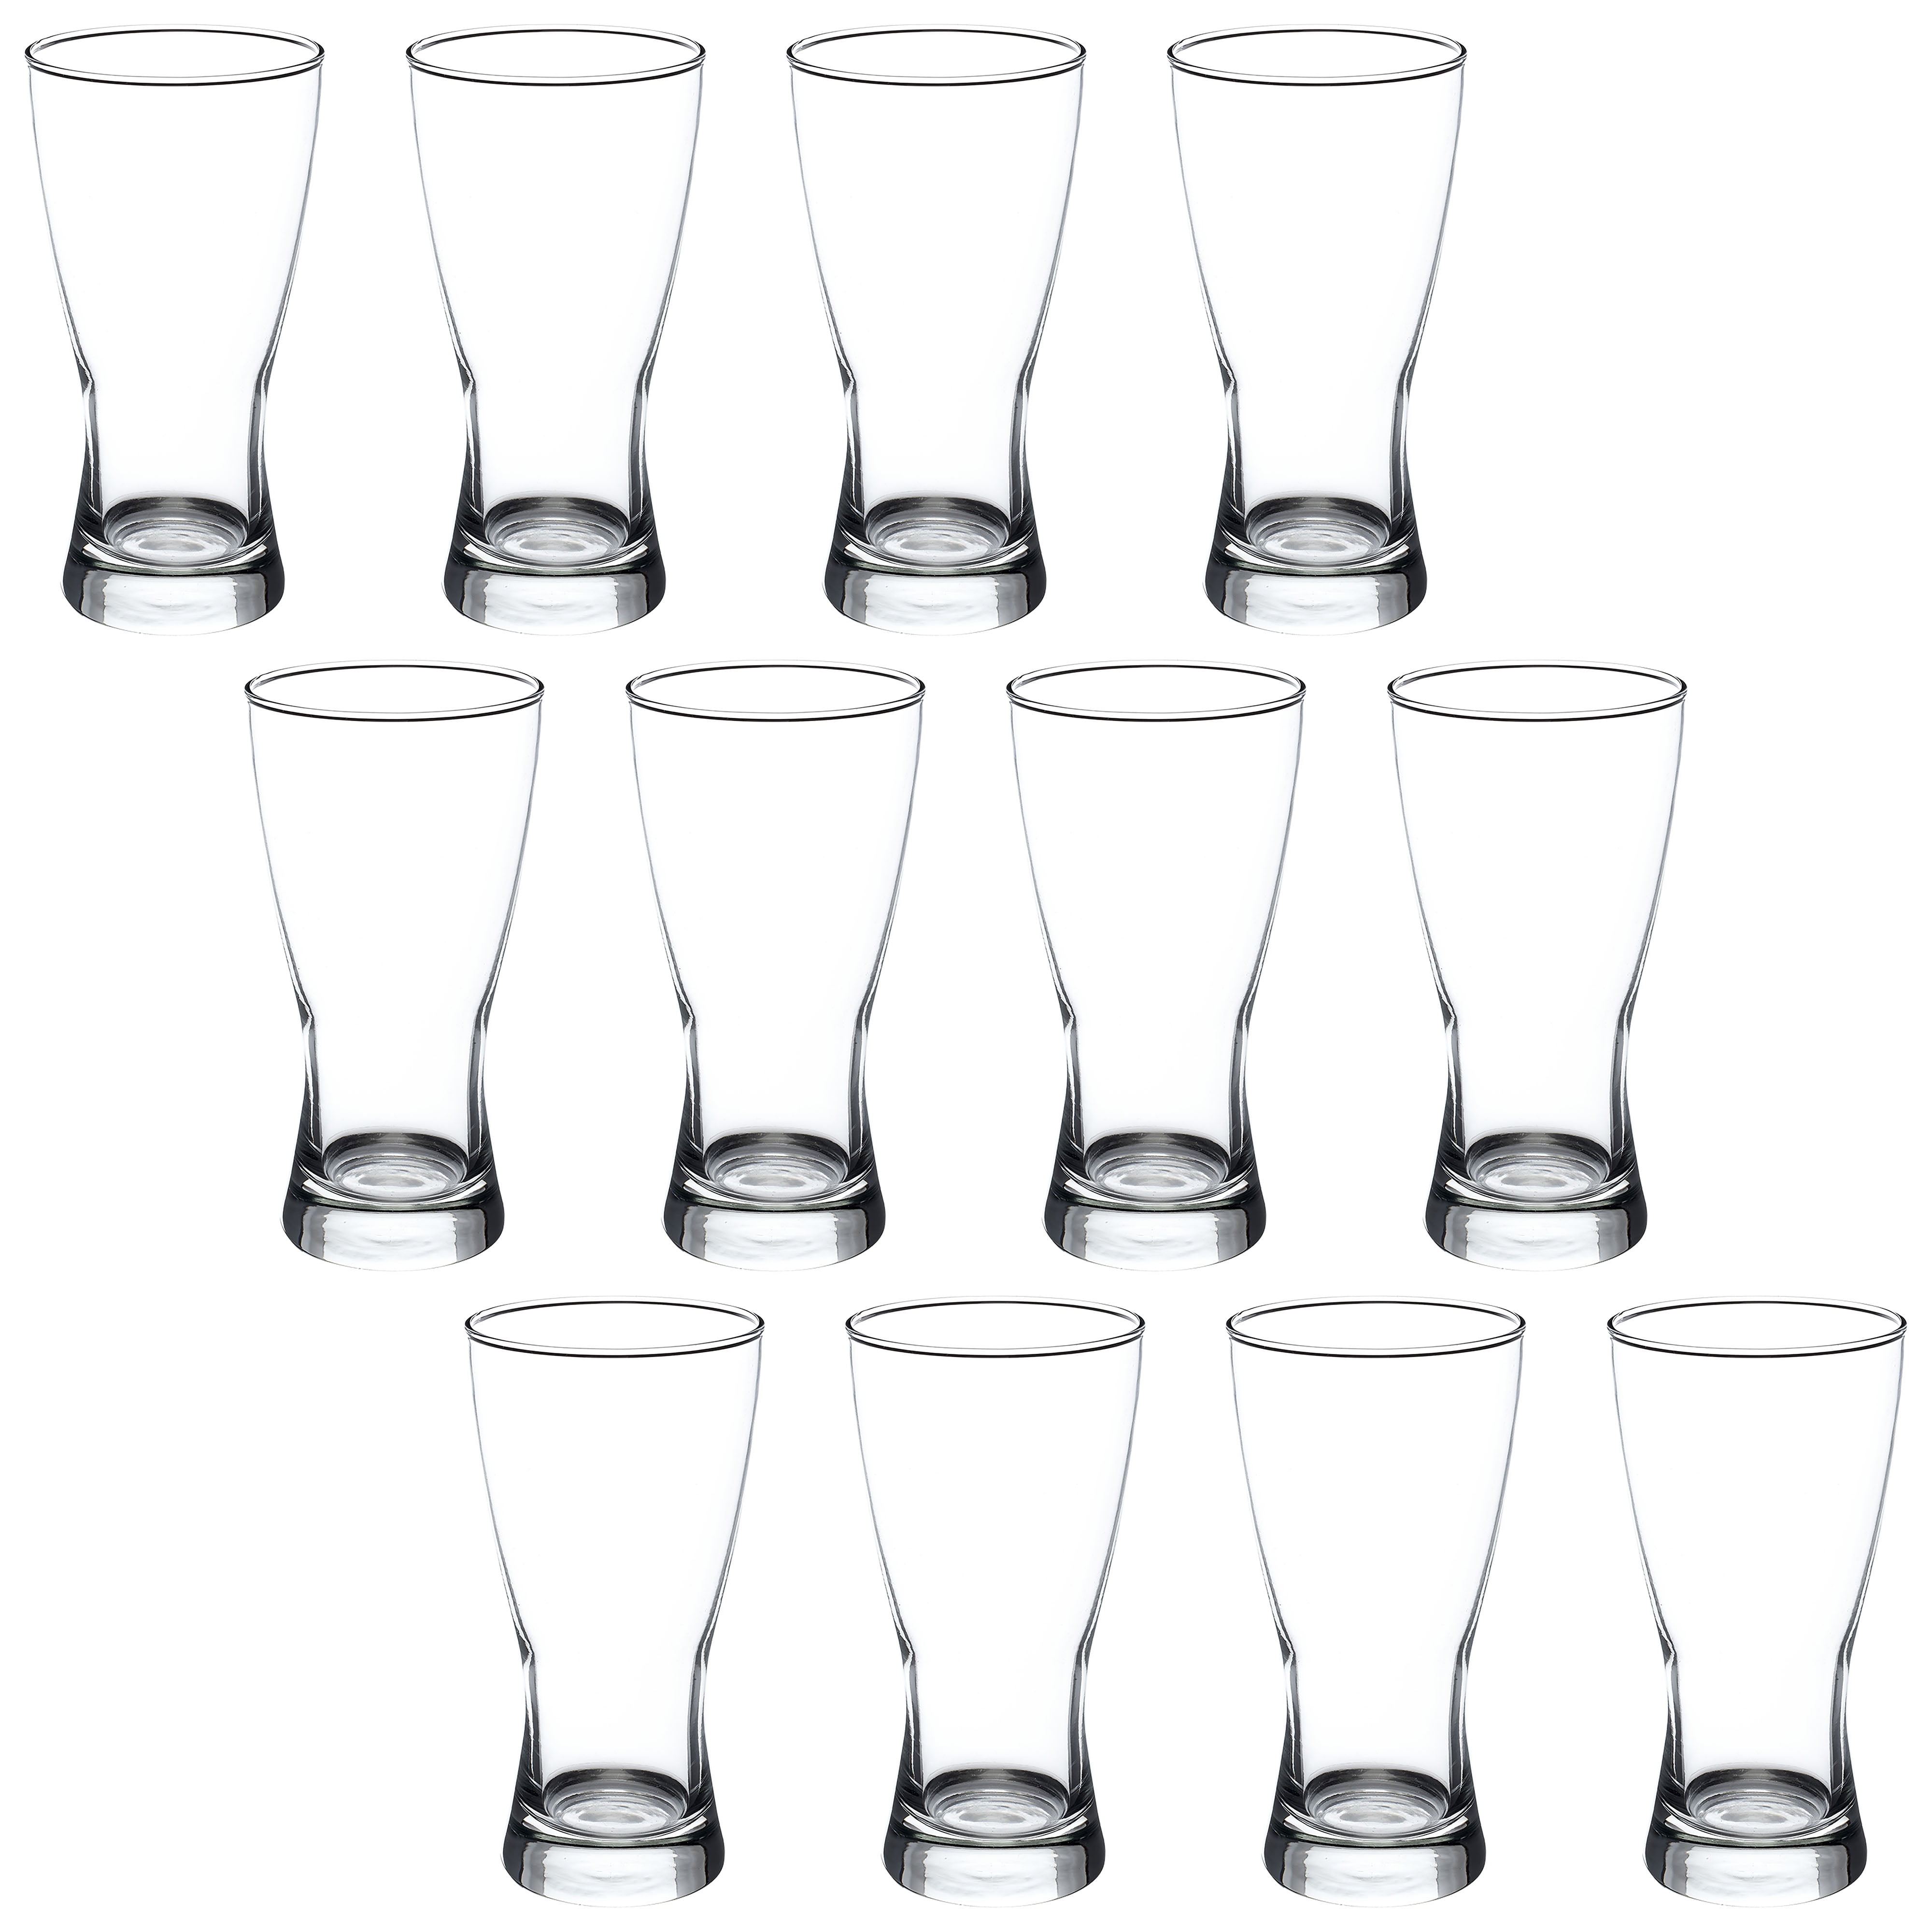 Restaurantware 14 Ounce Tall Beer Glasses, Set of 6 Tall-Footed Pilsner Glasses - Fine-Blown, Dishwasher-Safe, Clear Glass Beer Glass Set, Lead-Free